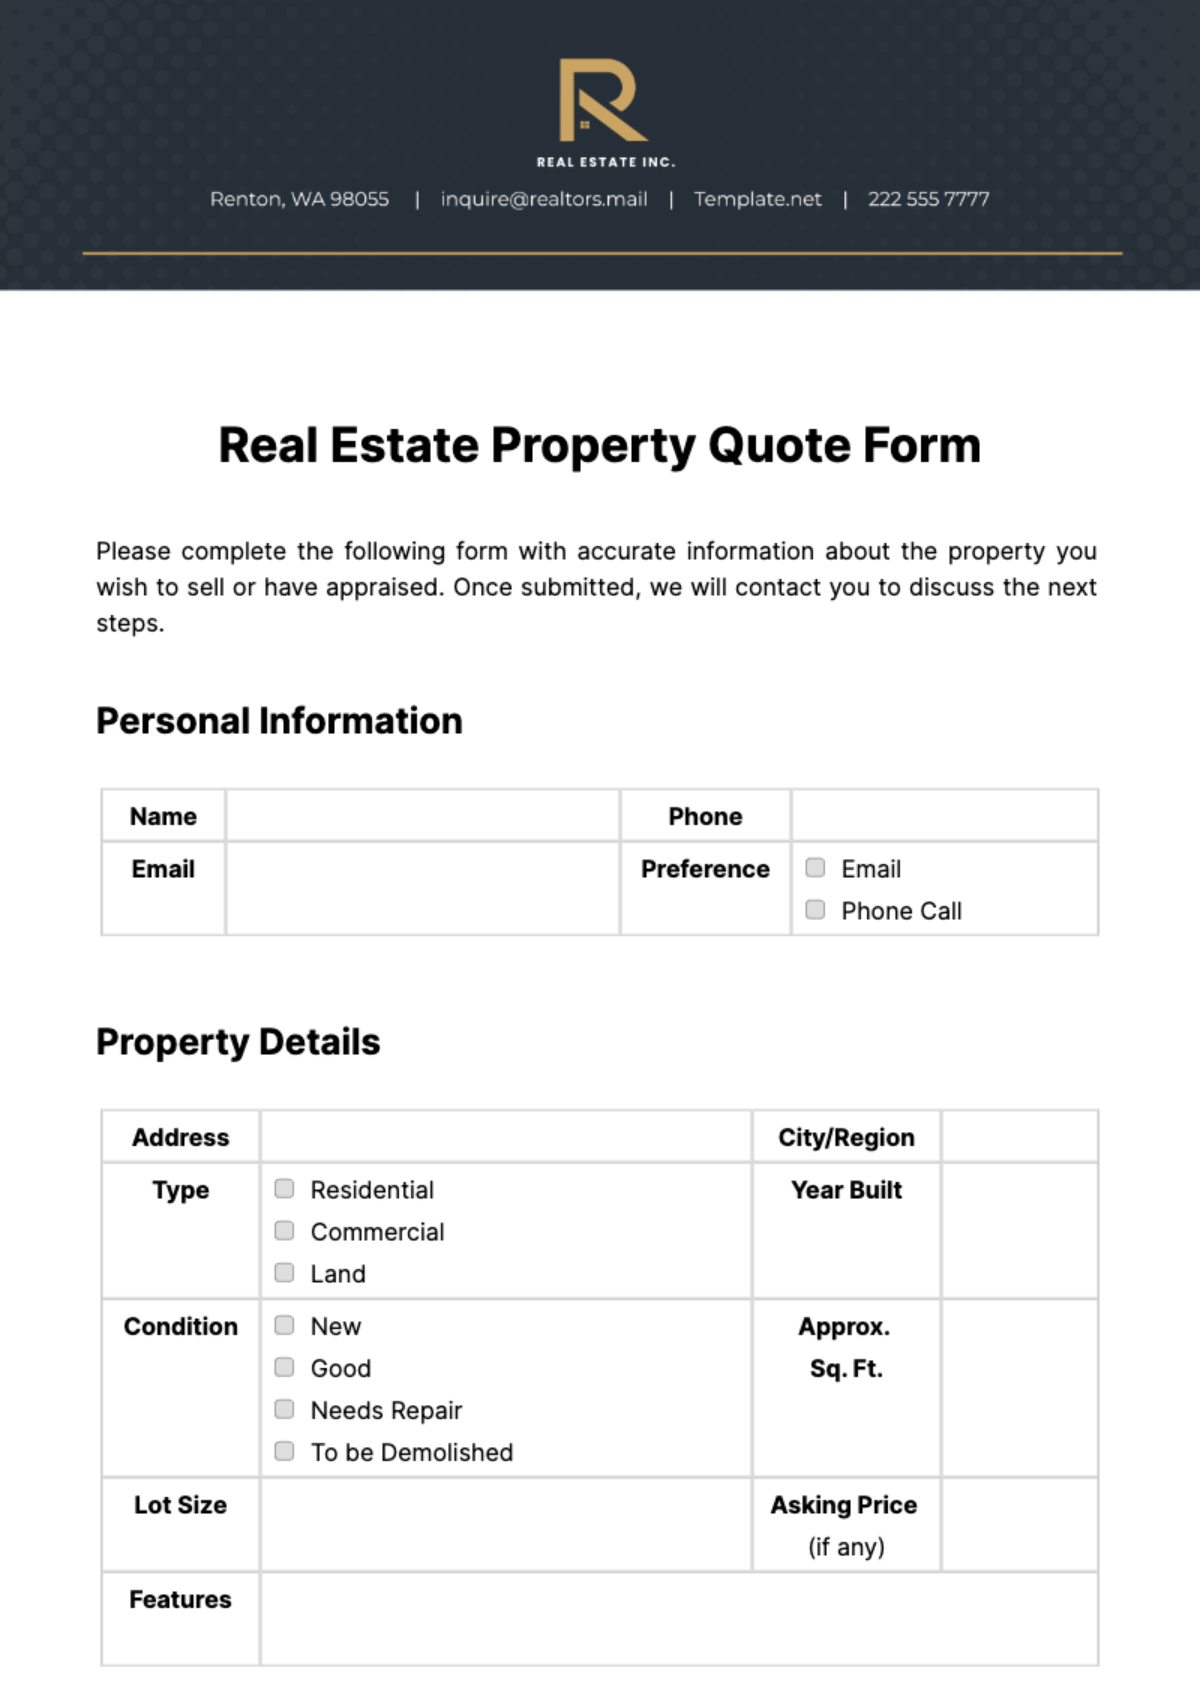 Real Estate Property Quote Form Template